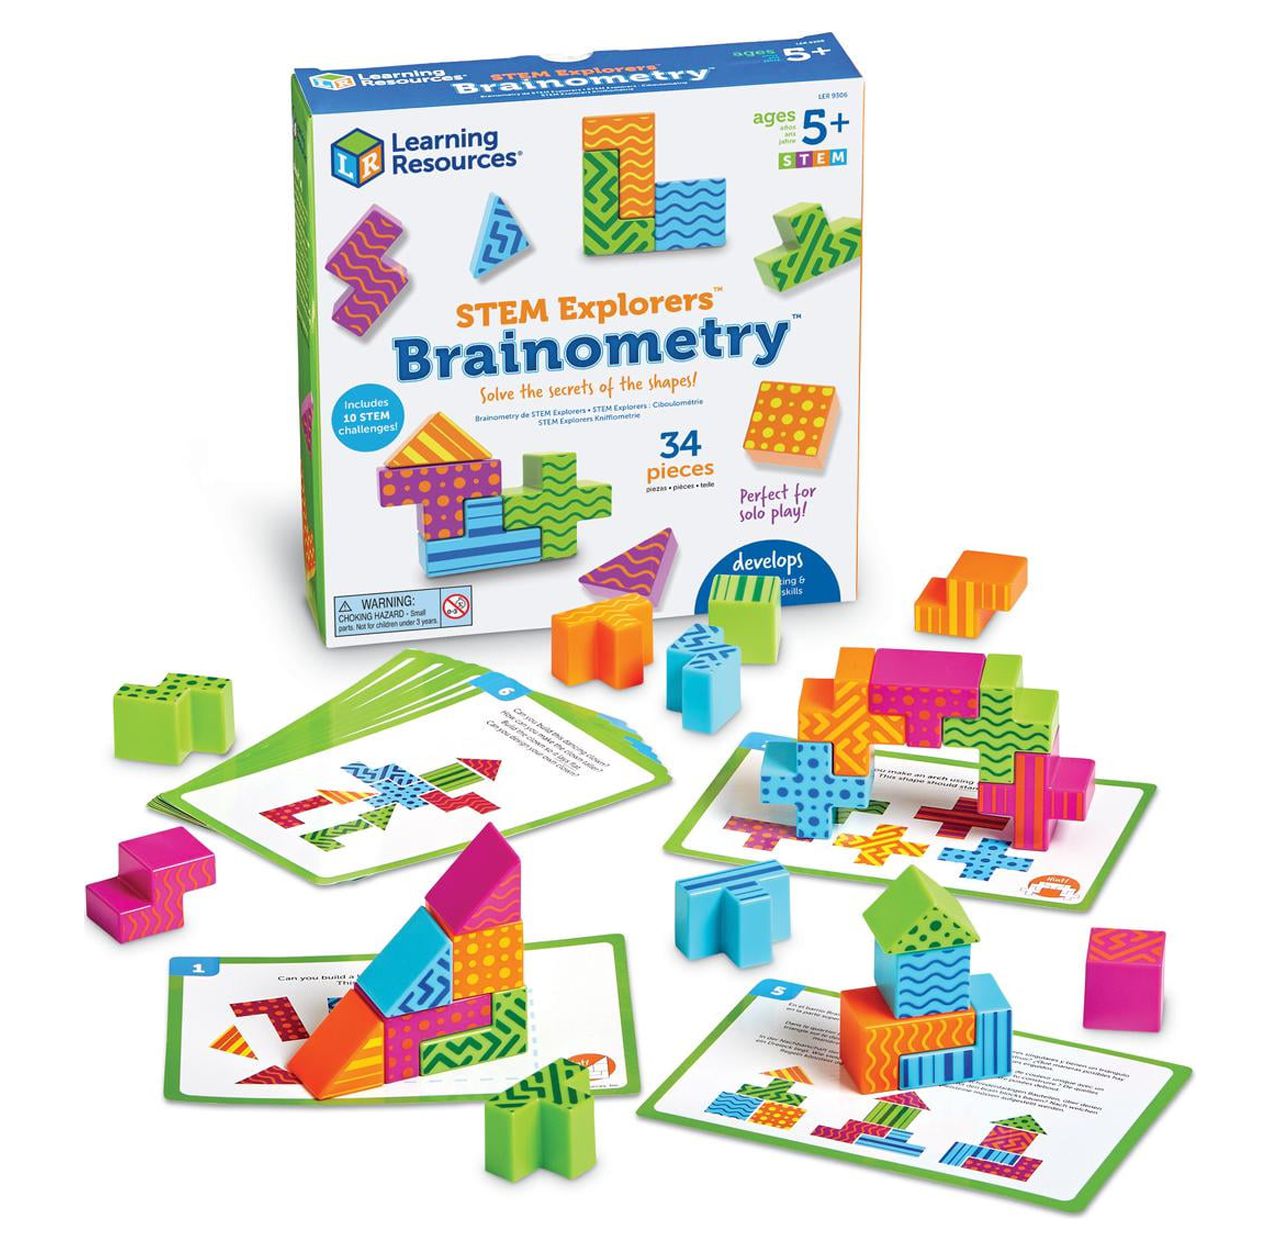 Learning Resources STEM Explorers Brainometry - STEM Toys and Games for Kids Ages 5+ | MTTS188